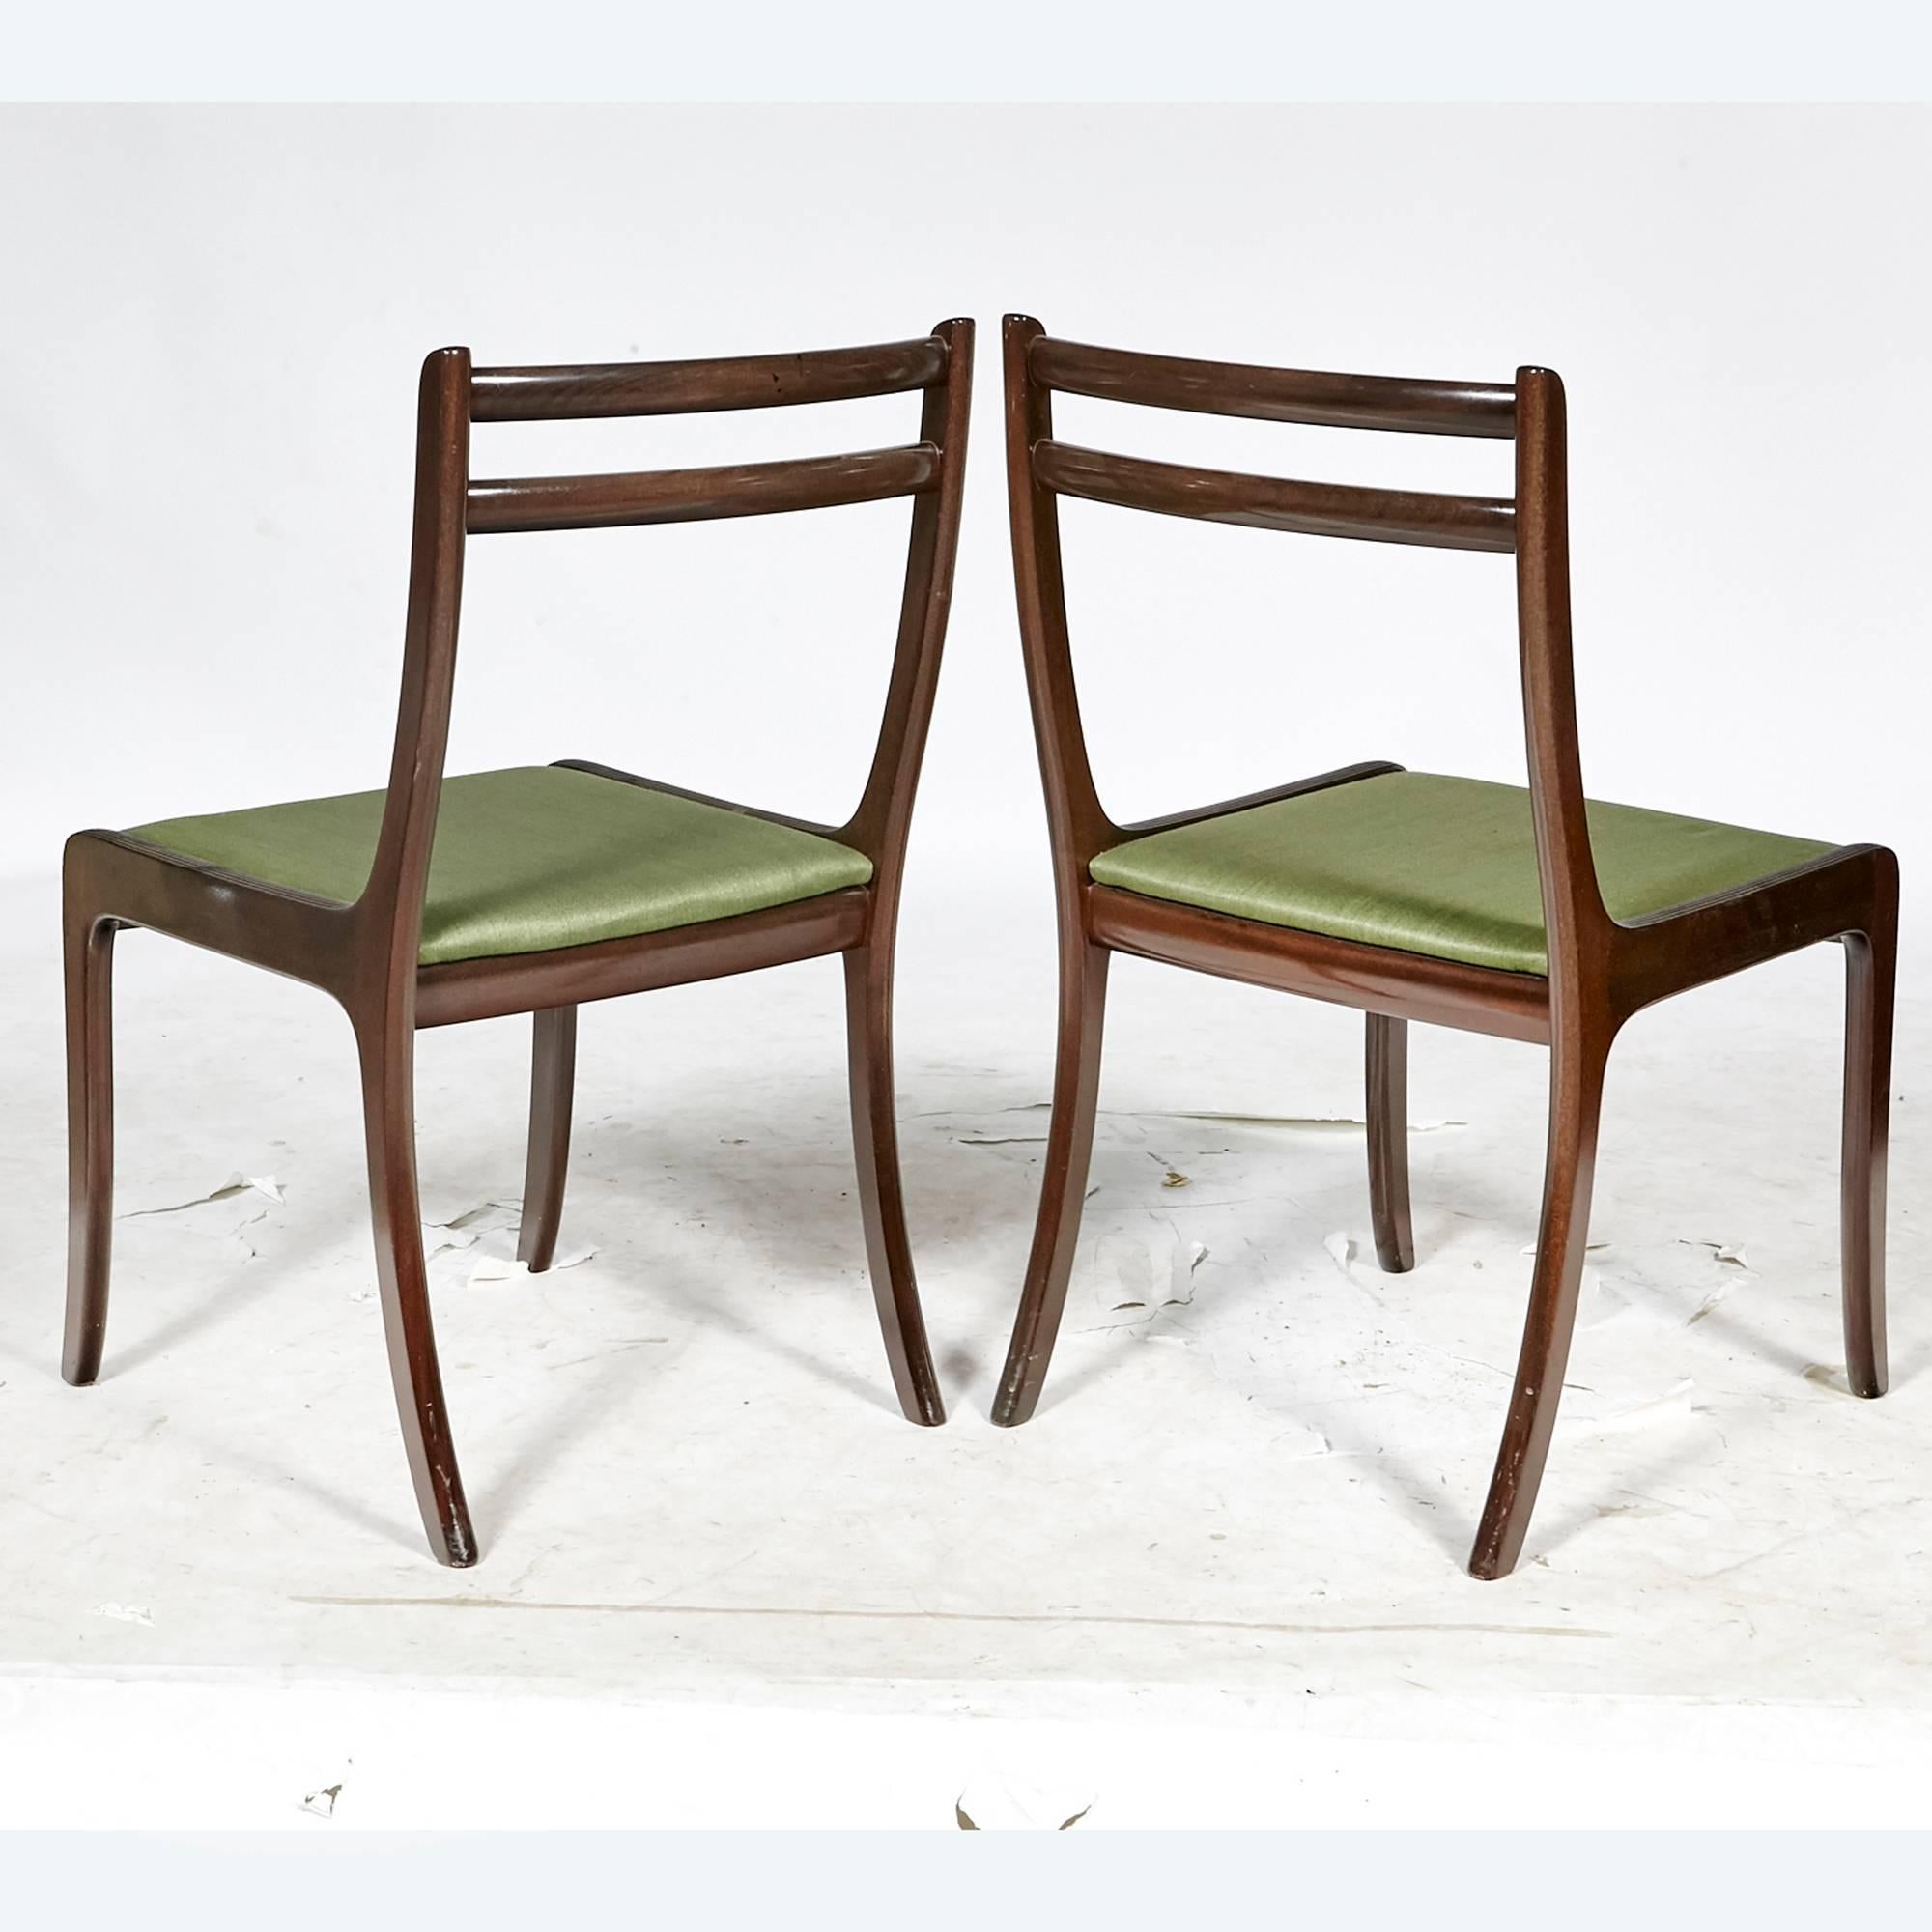 Danish Mahogany Dining Chairs by Ole Wanscher for Poul Jeppesen, 1960s For Sale 1